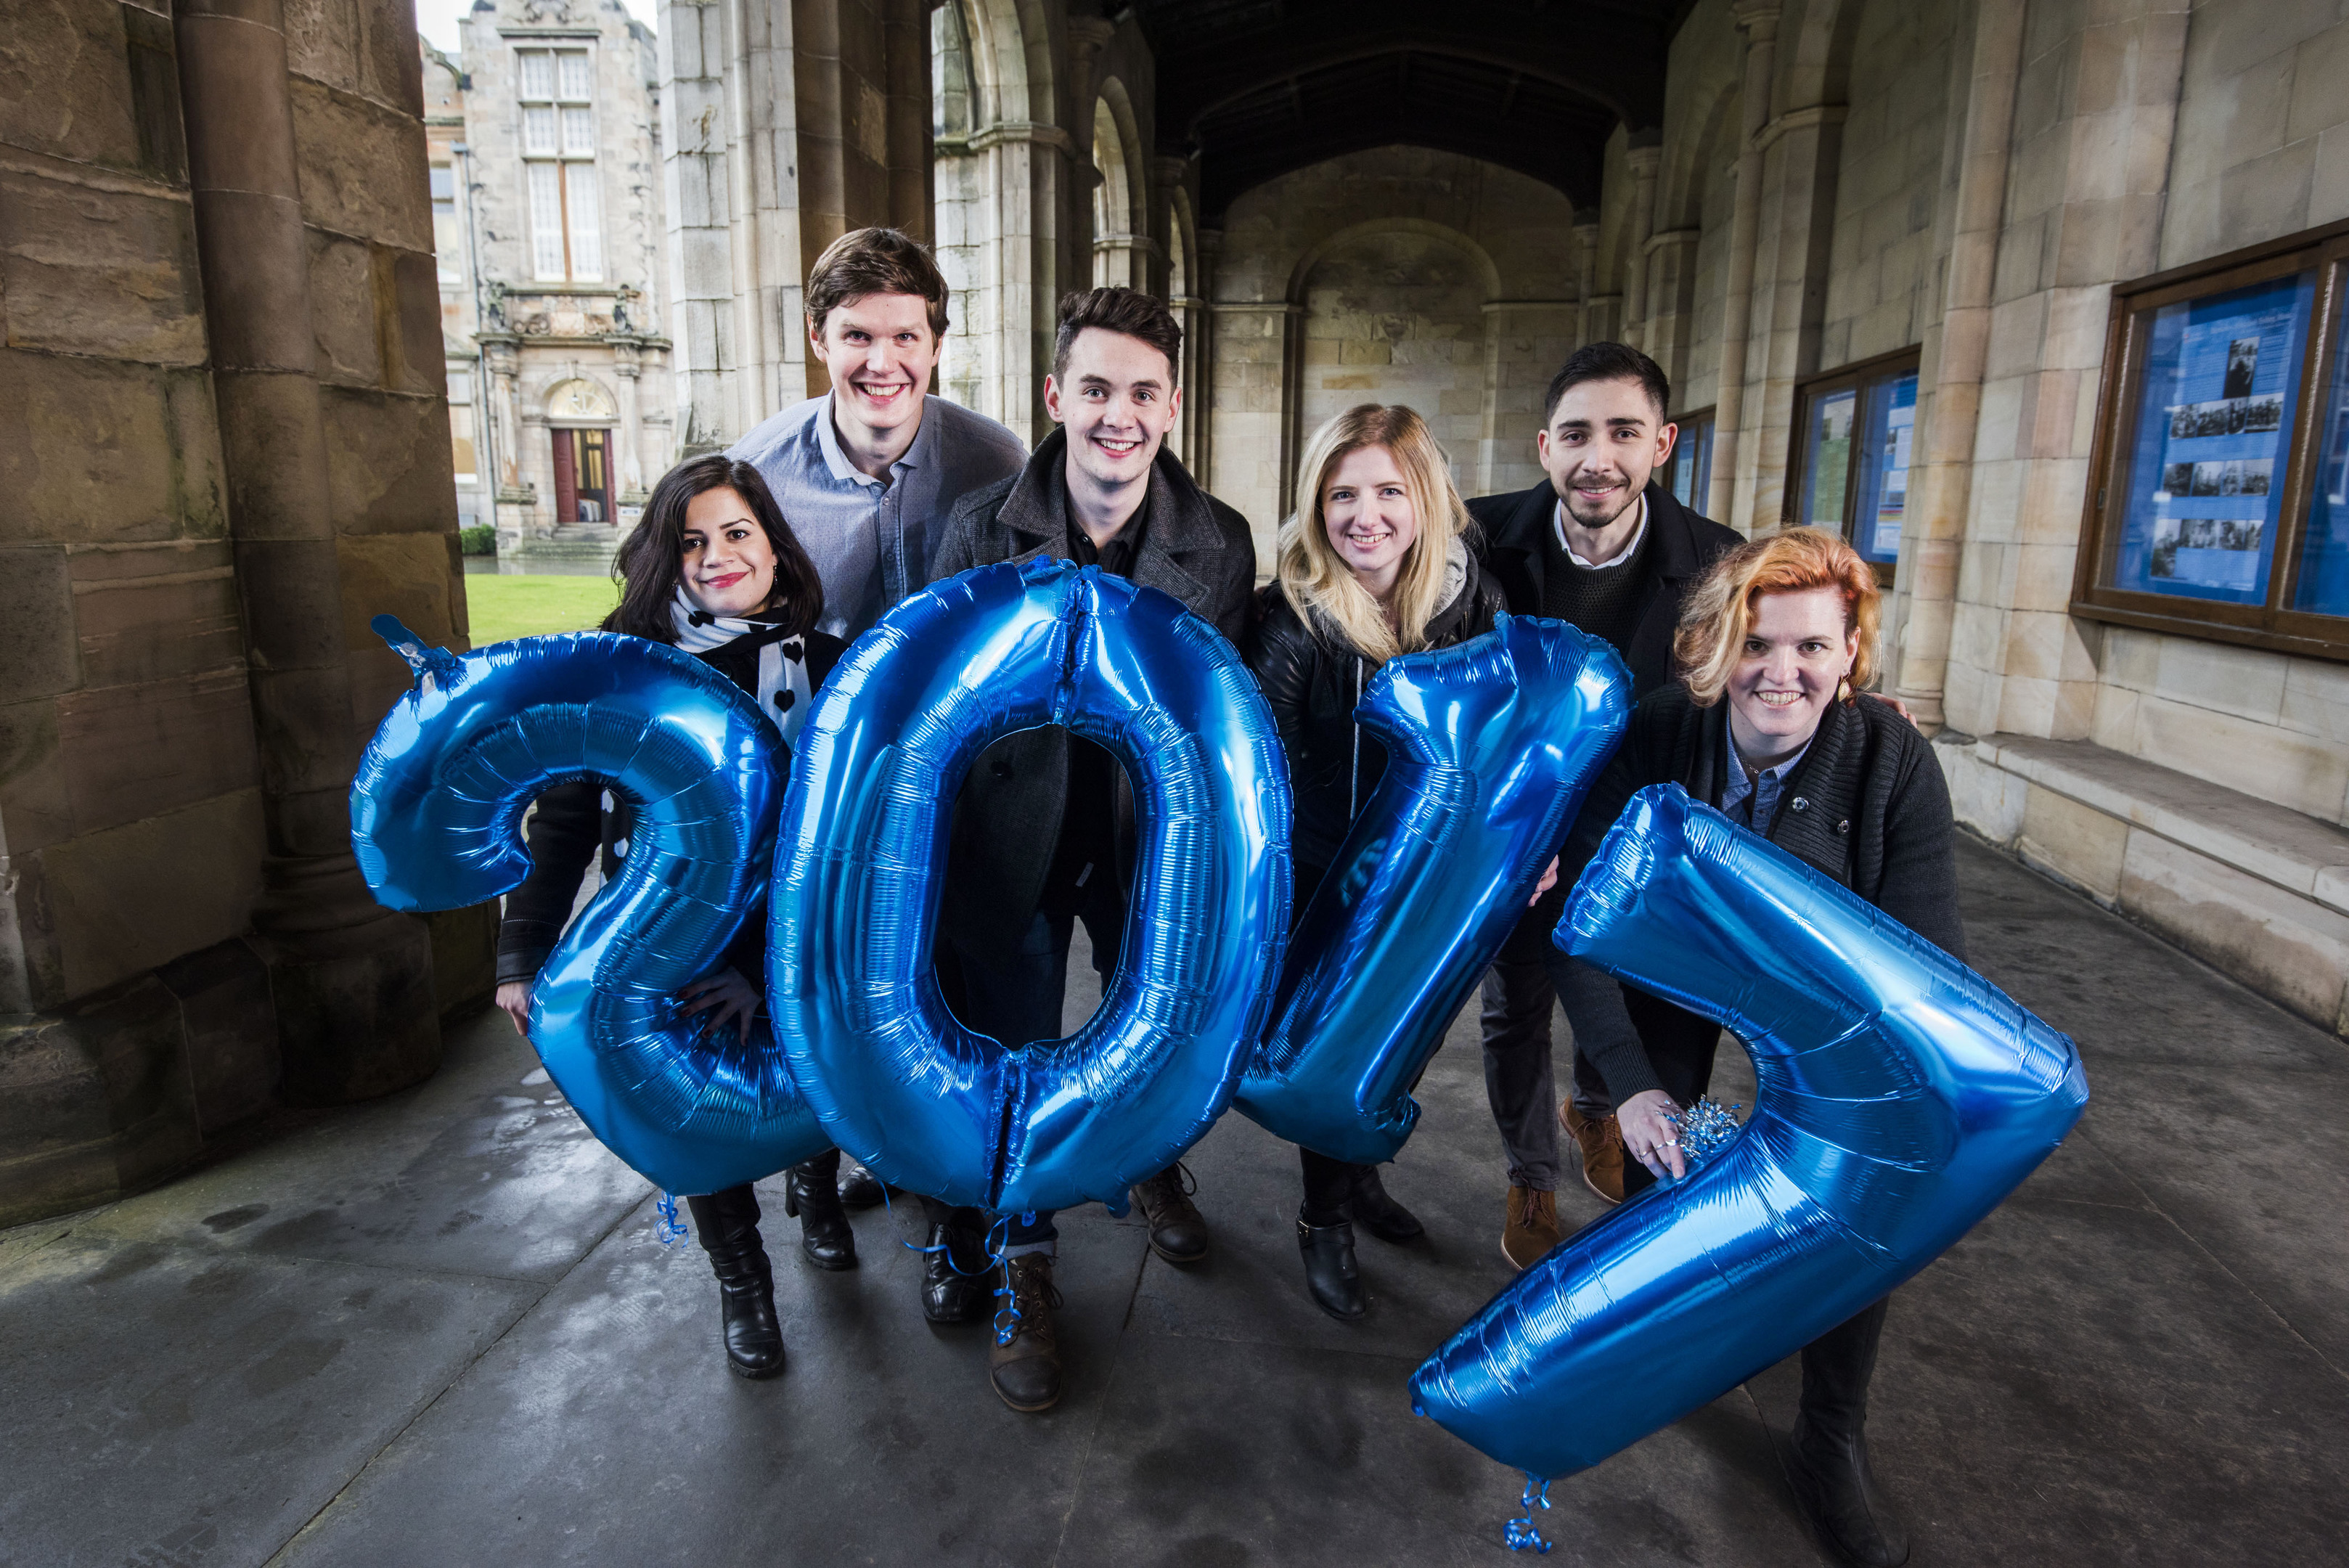 Celebrating the Year of History, Heritage & Archaeology successful Converge Challenge alumni launched the 2017 programme at the University of St Andrews.  L – R: Erika Grant, David Harris-Birtill, Chris Hughes, Victoria Hamilton, Rogelio Arellano and Anne Rushing